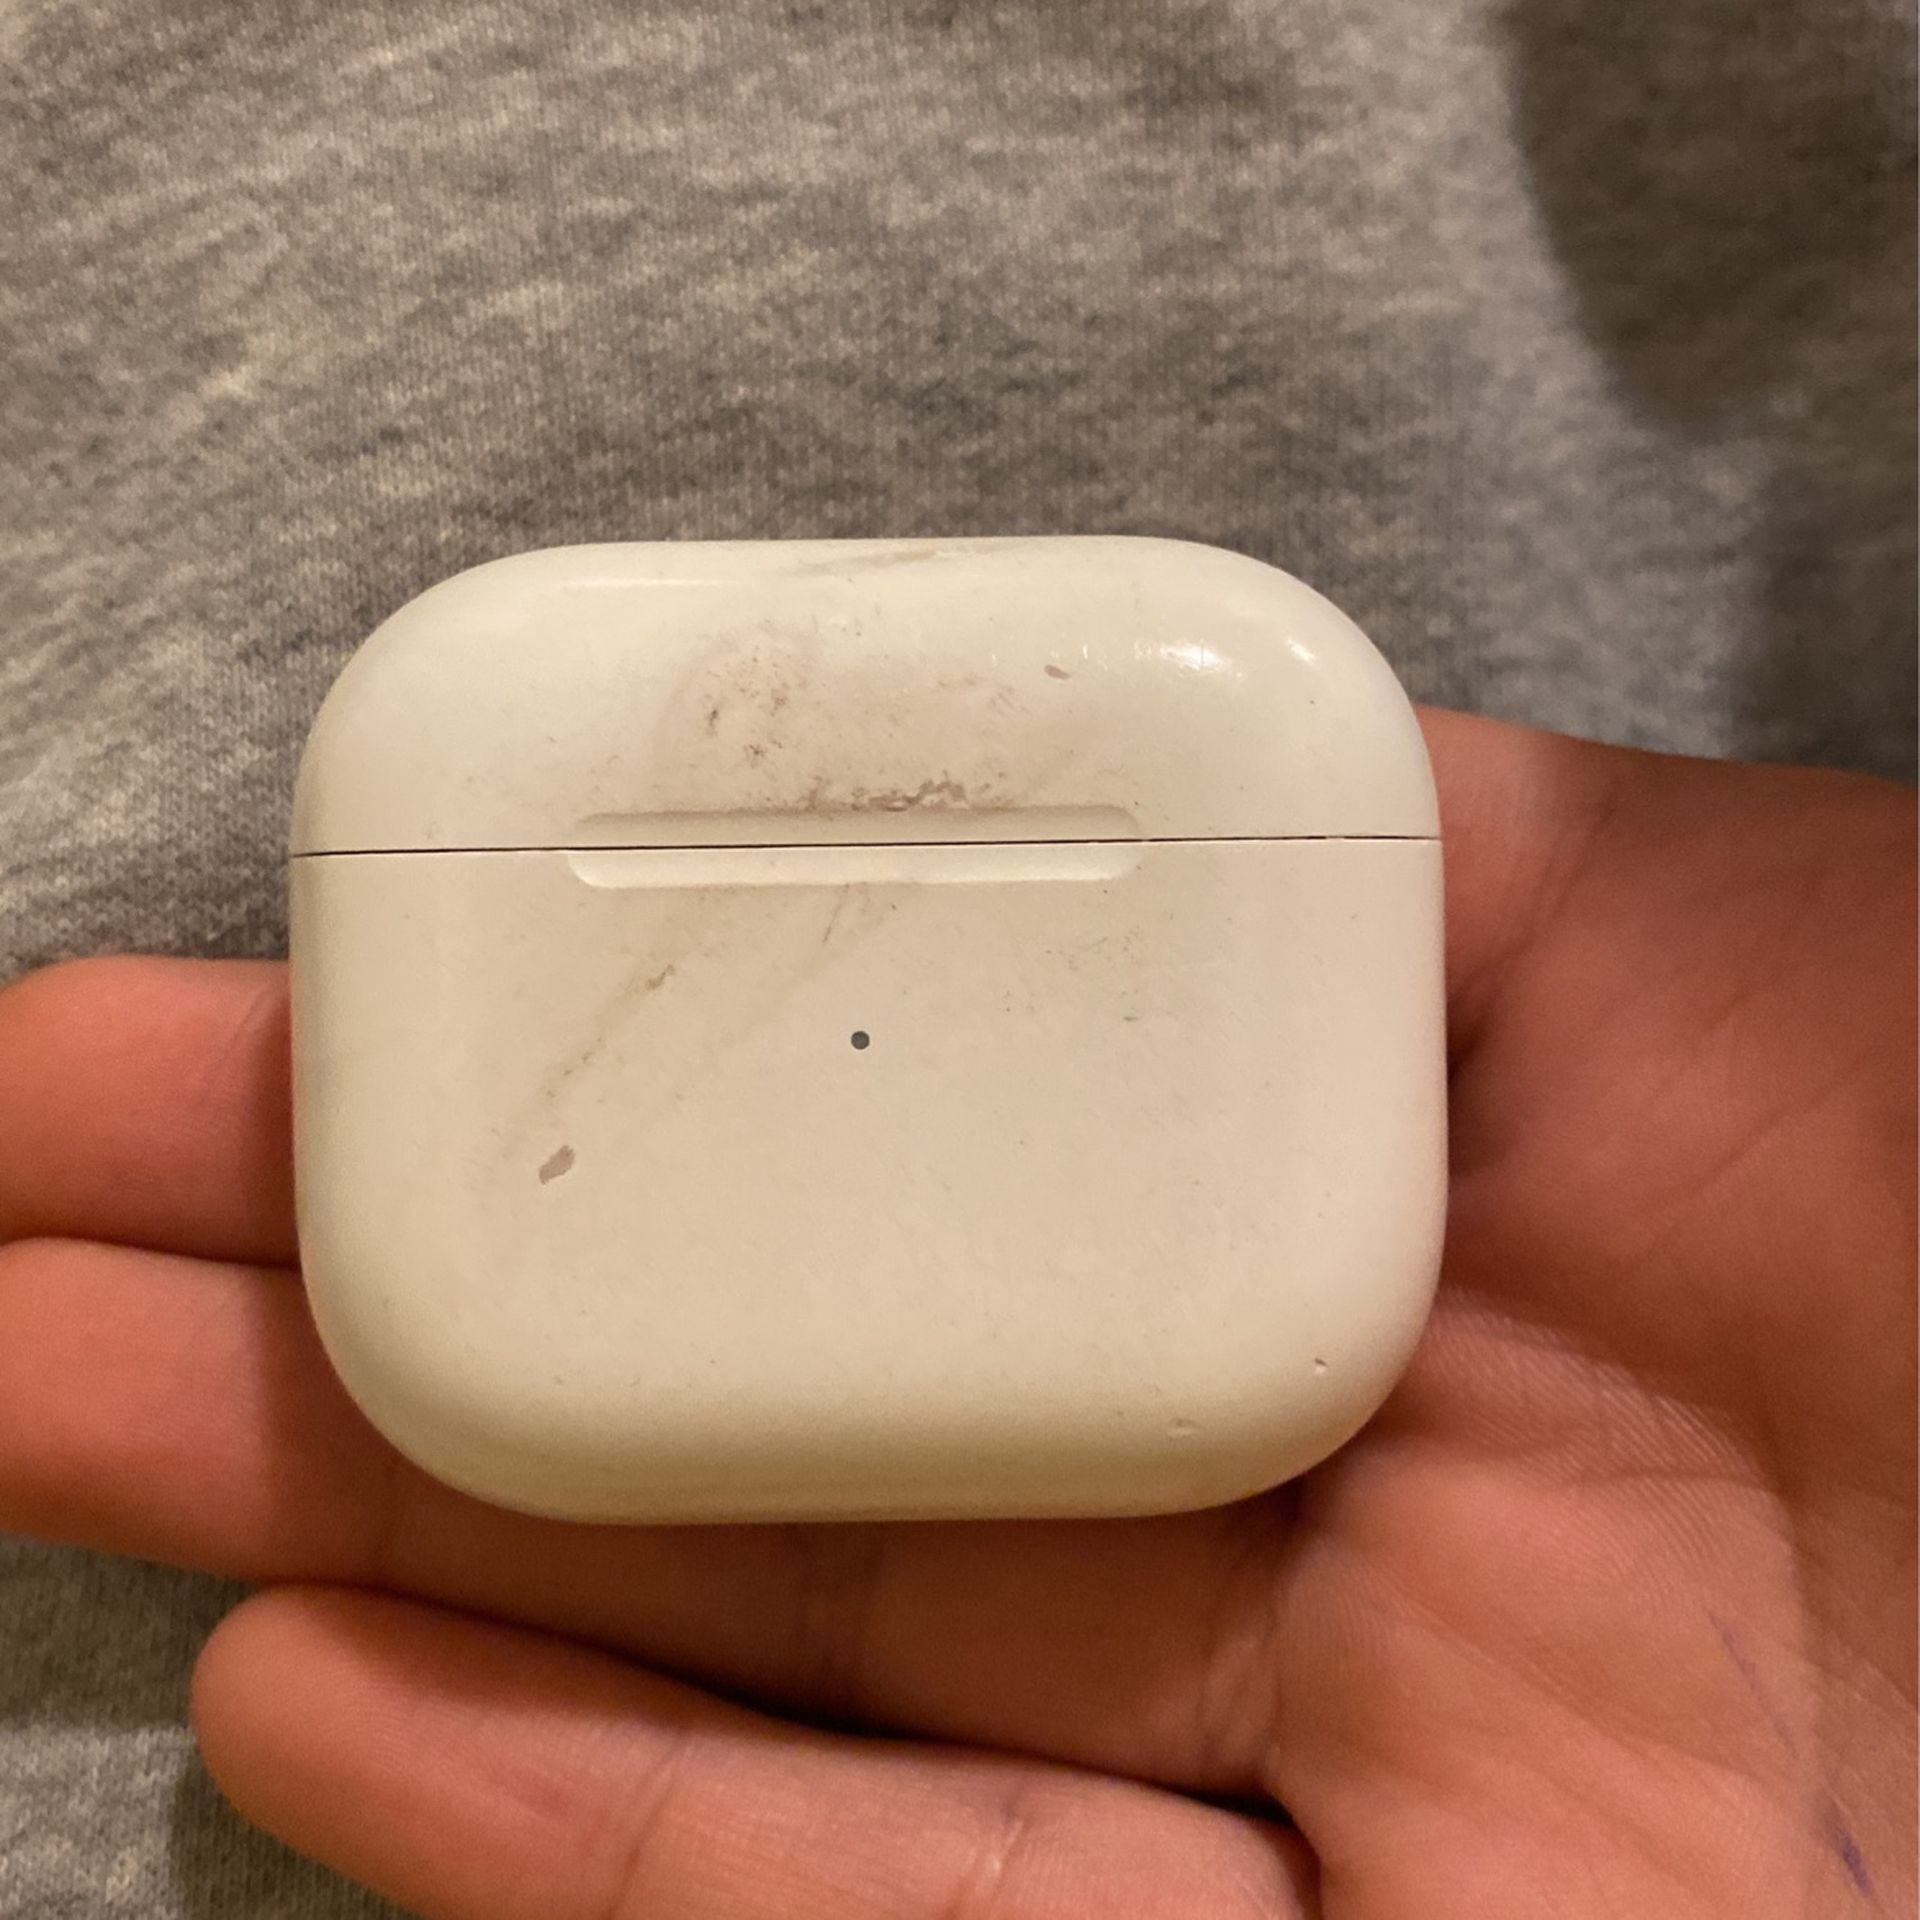 Air pods Pro 